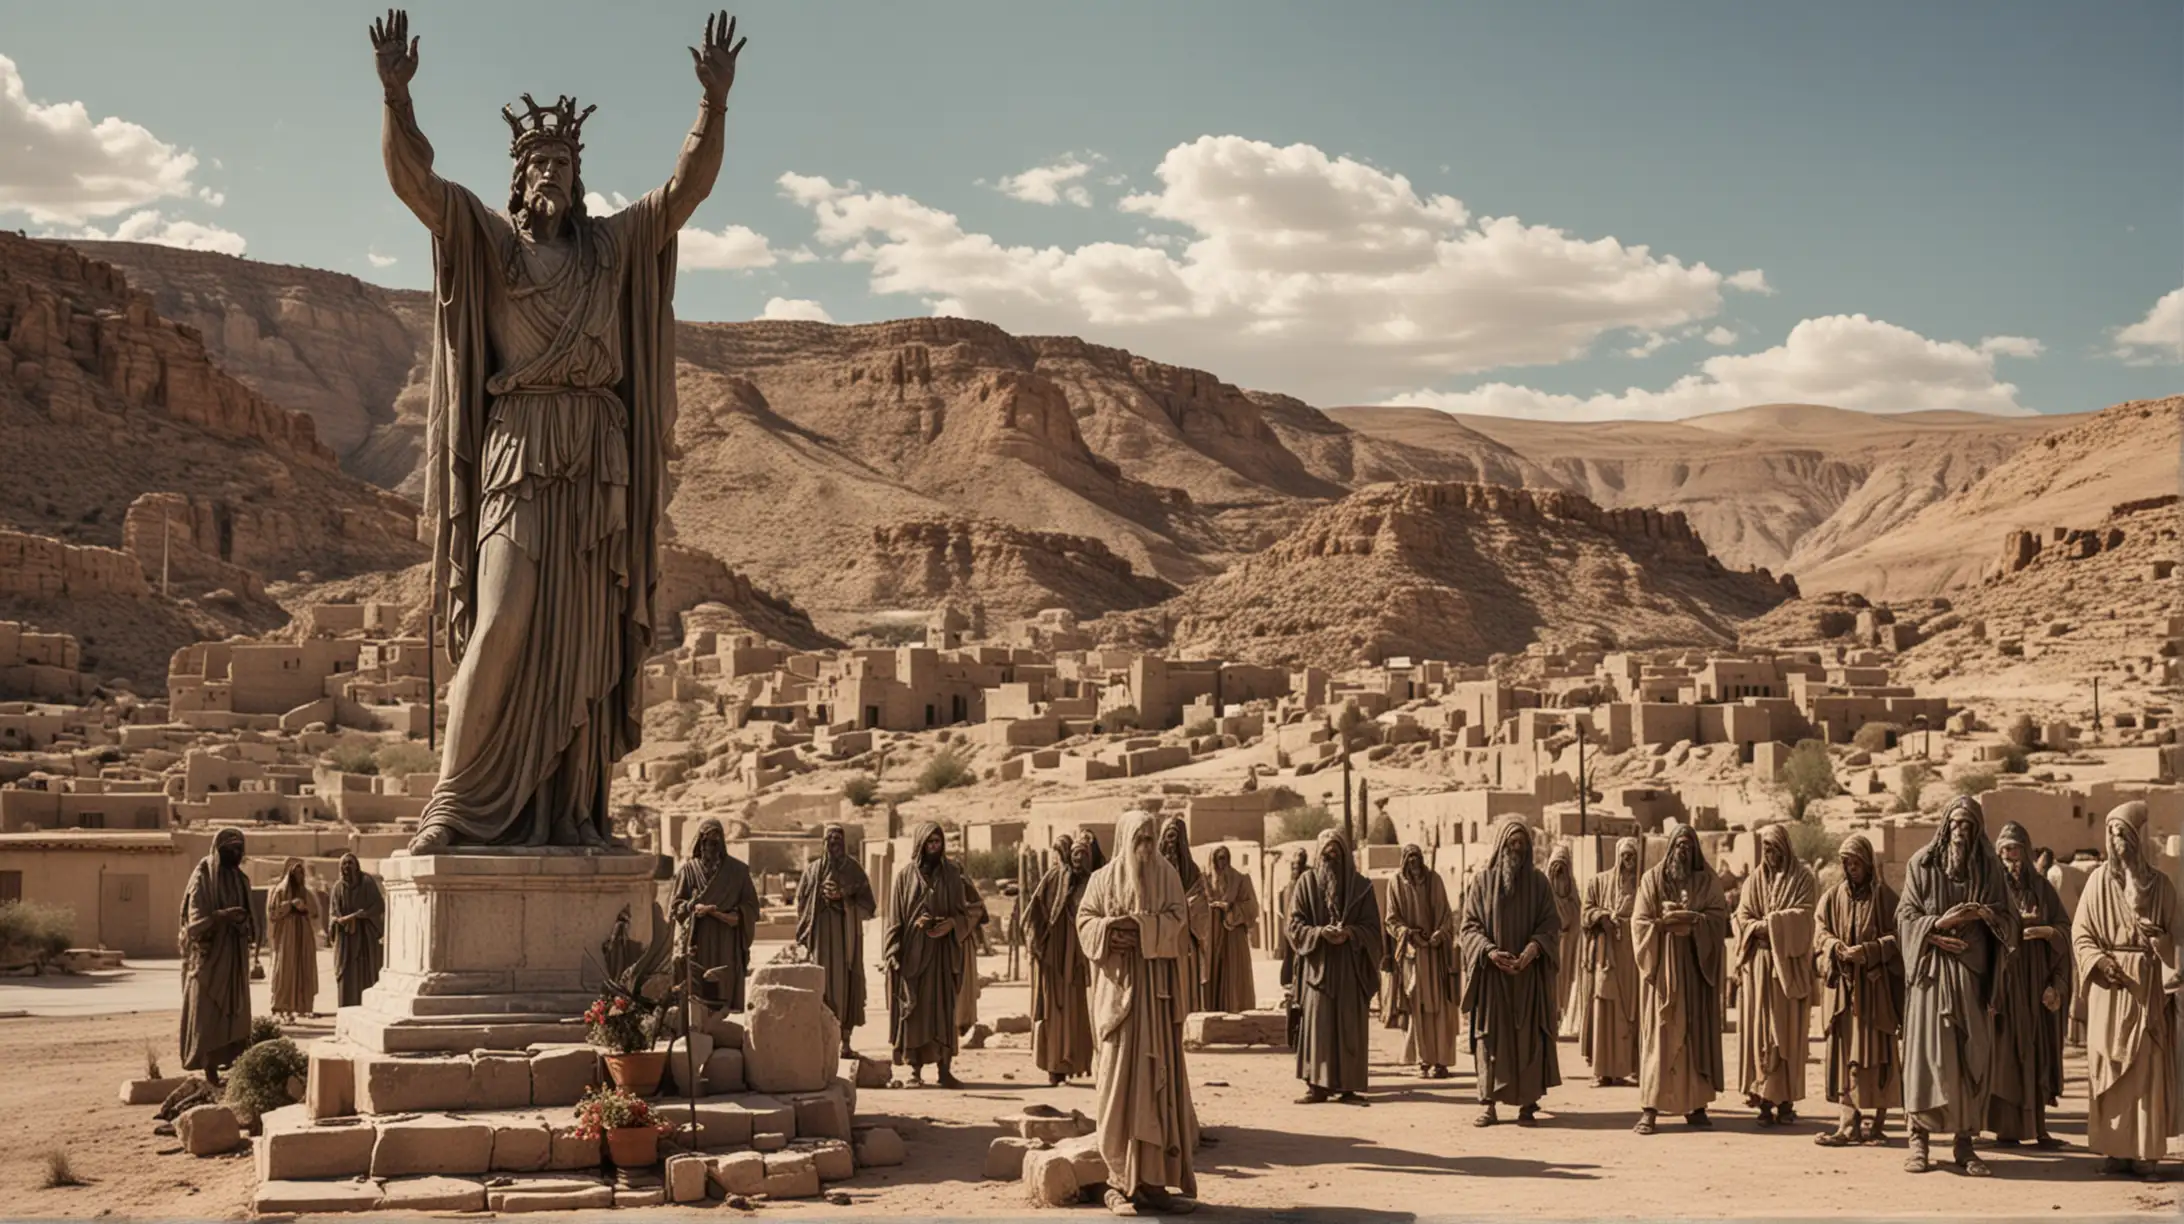 Pagan Statue in Ancient Desert Town Gathering